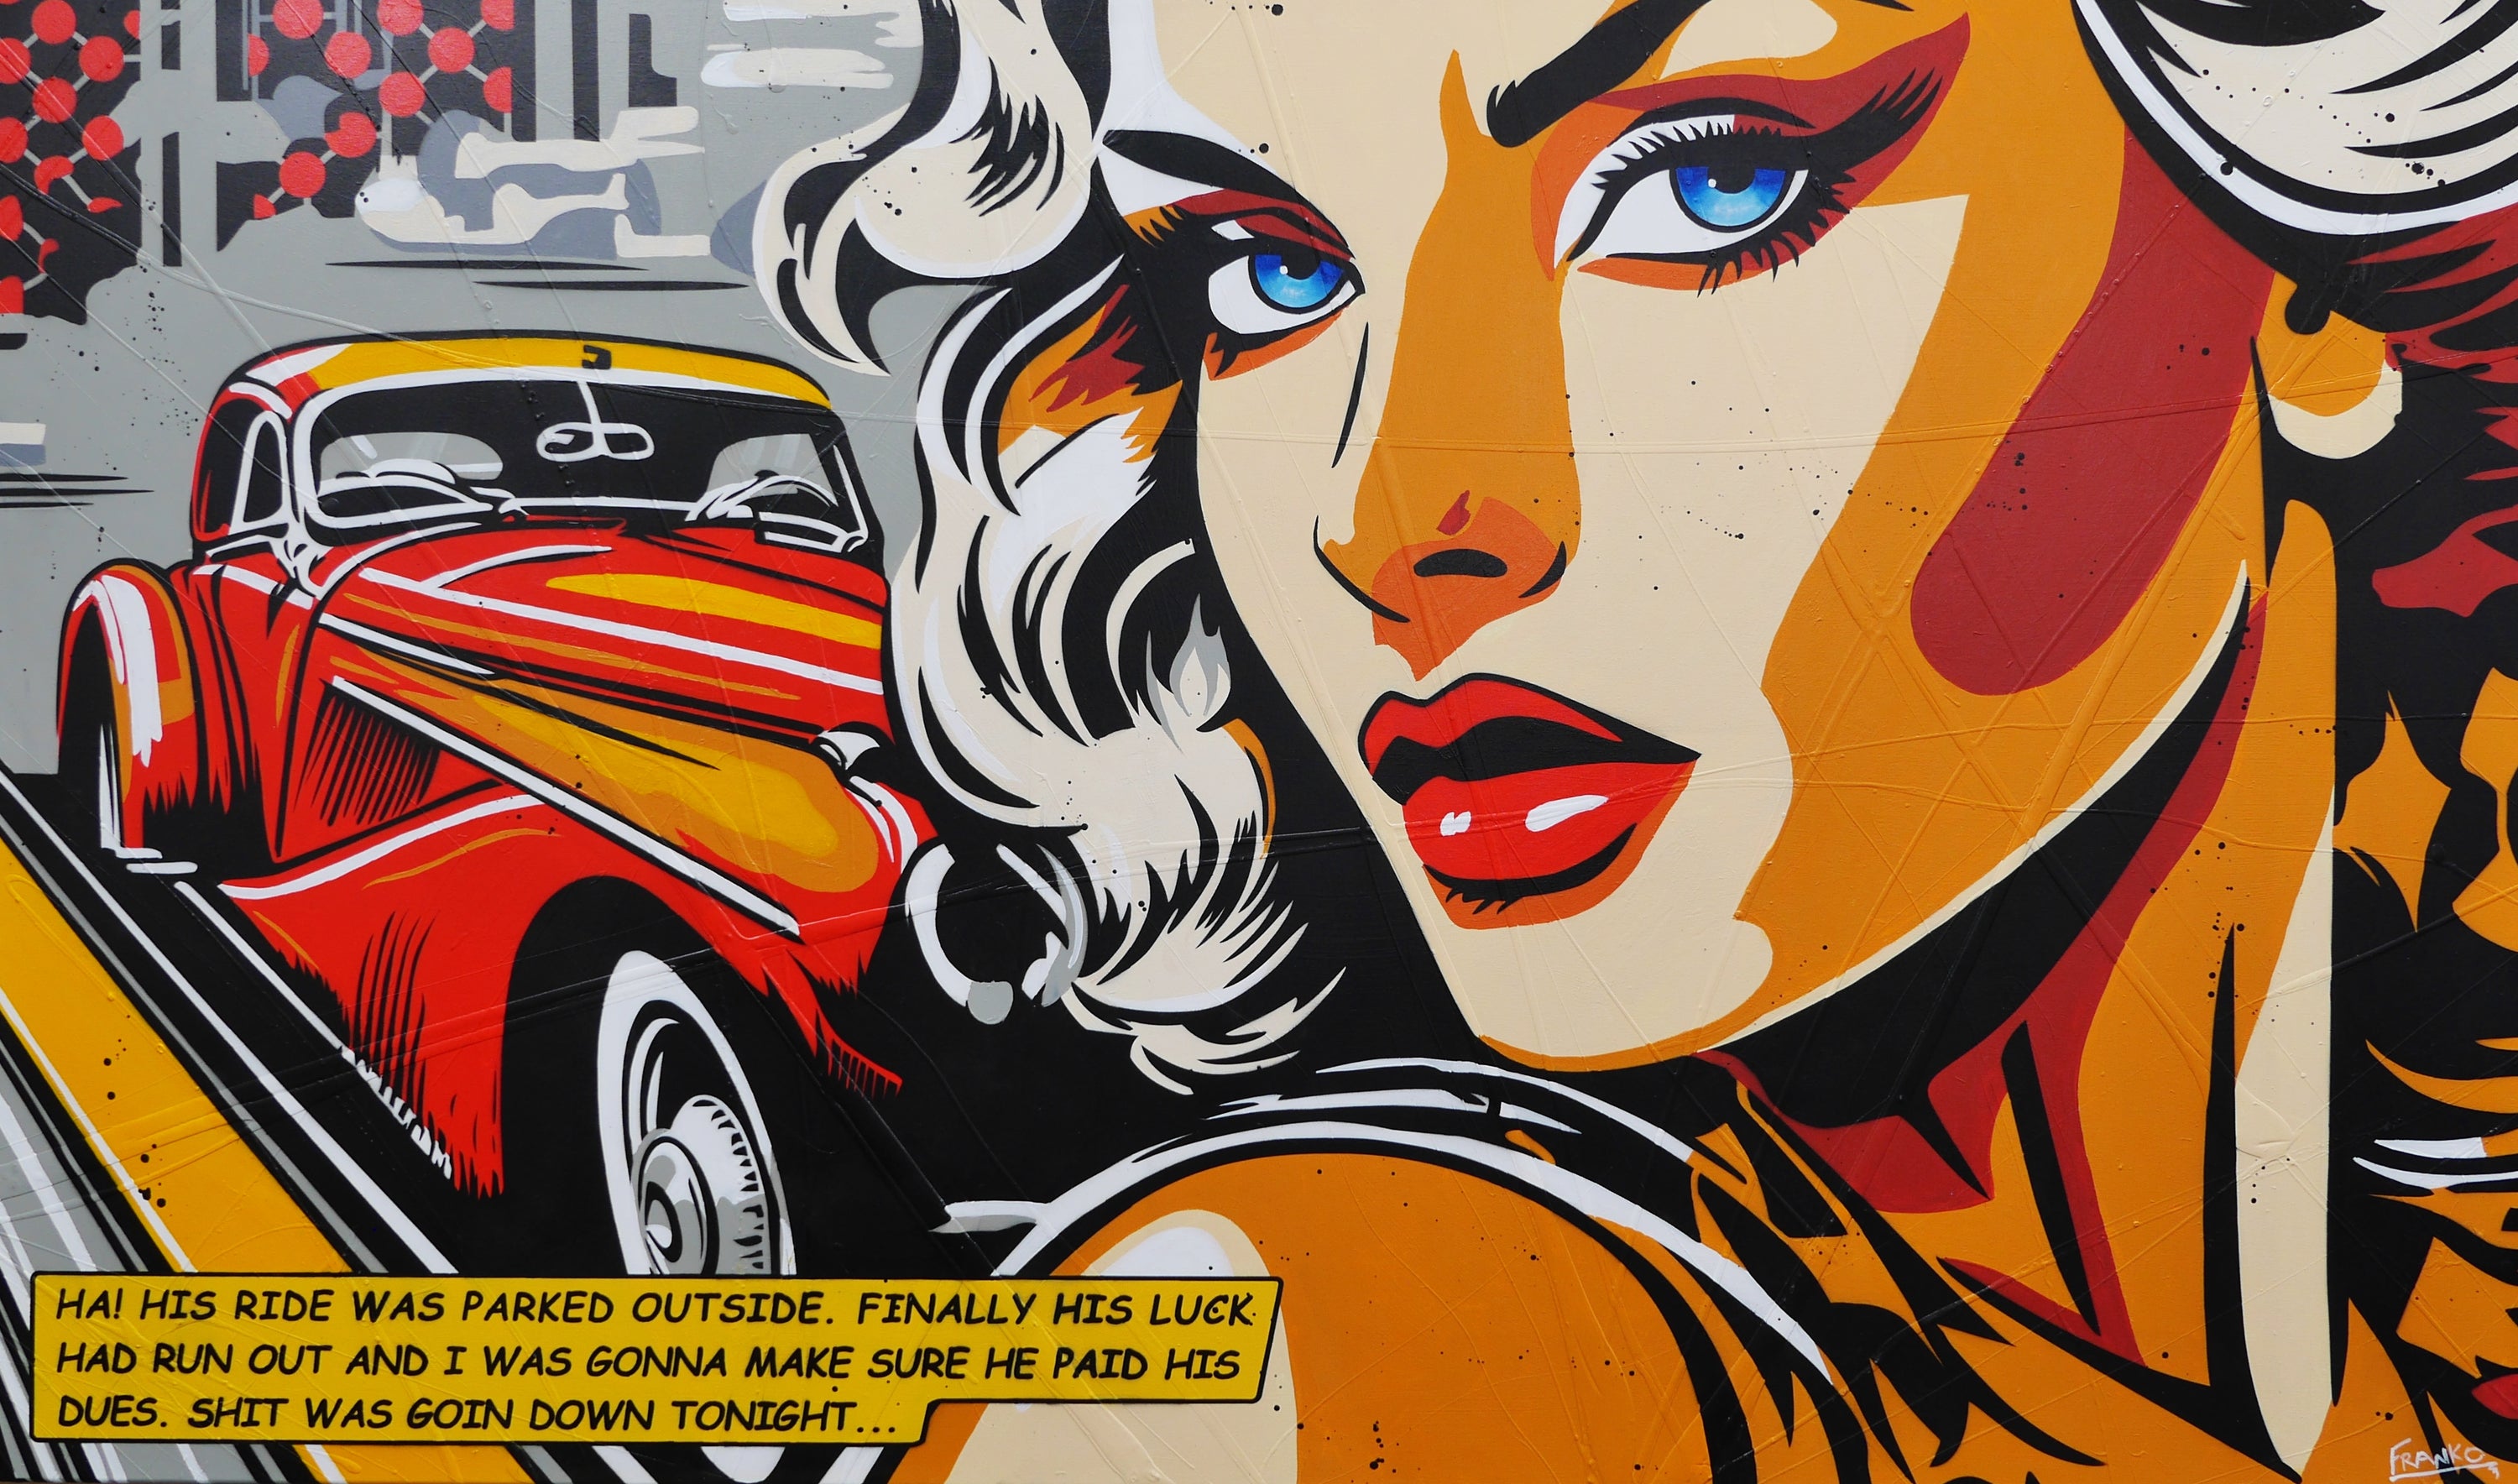 All About the Luck 200cm x 120cm Textured Classic Pop Art Painting (SOLD)